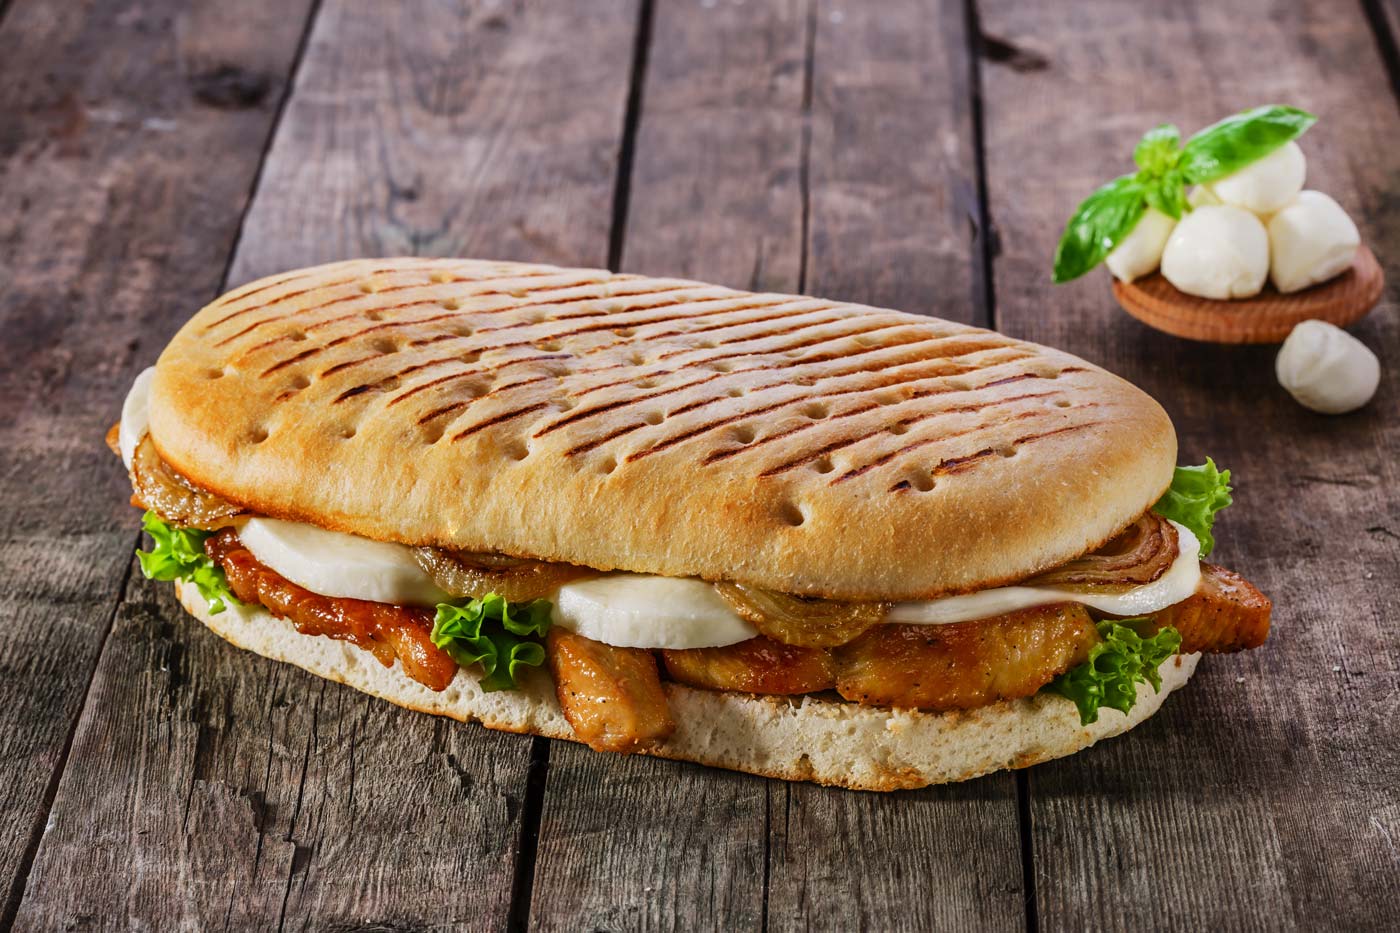 Grilled sandwich with chicken and mozzarella cheese